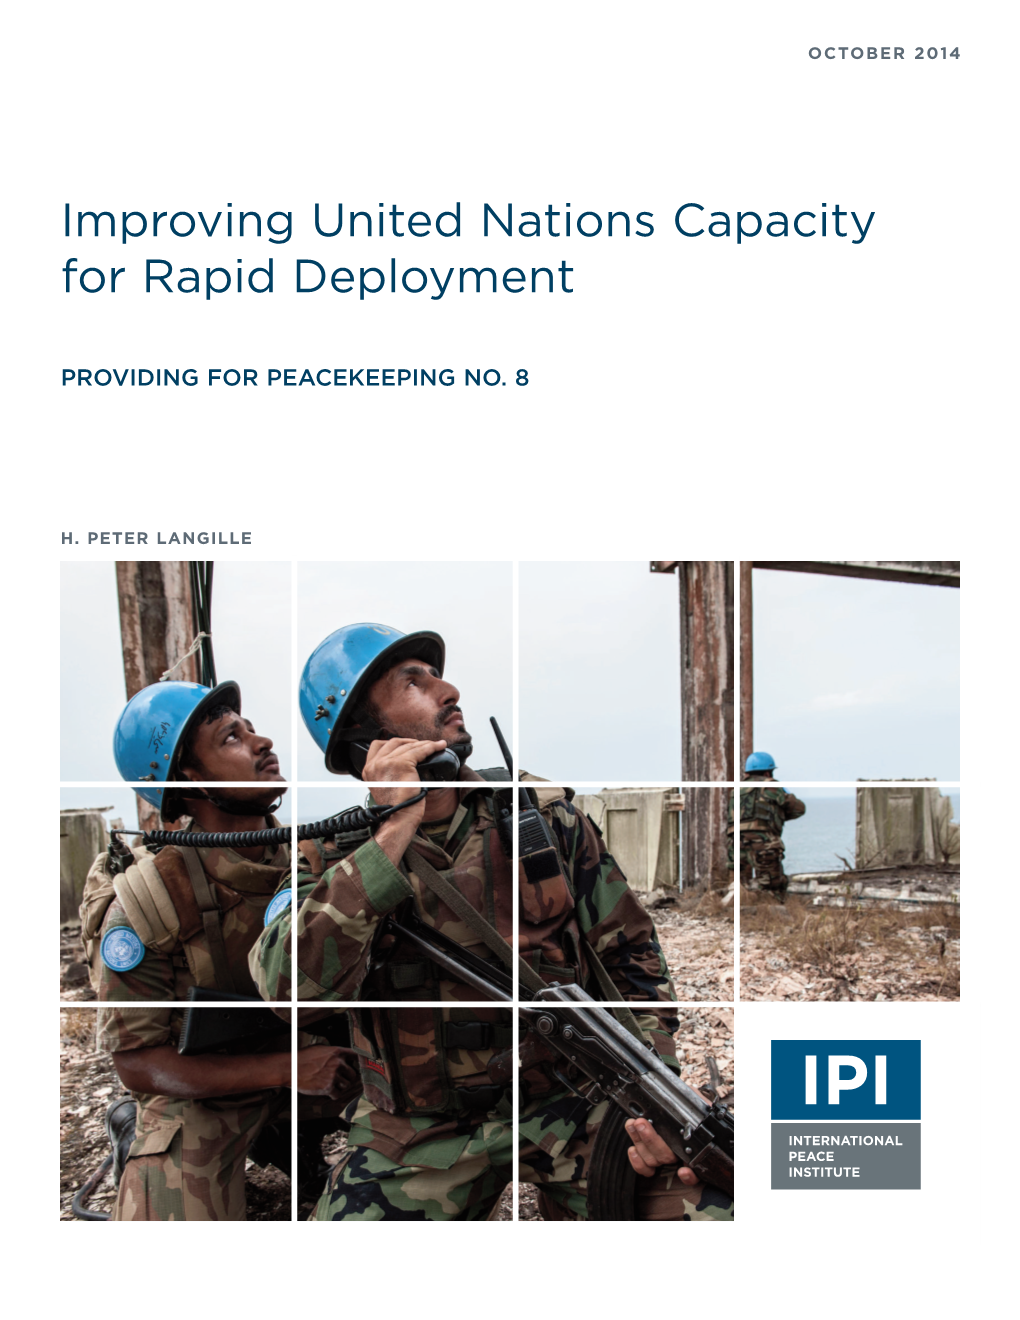 UN Rapid Deployment, As More Difficult Than to Recover from an Initial Percep - Well As Cooperative Efforts to Revitalize the Former Tion of Weakness